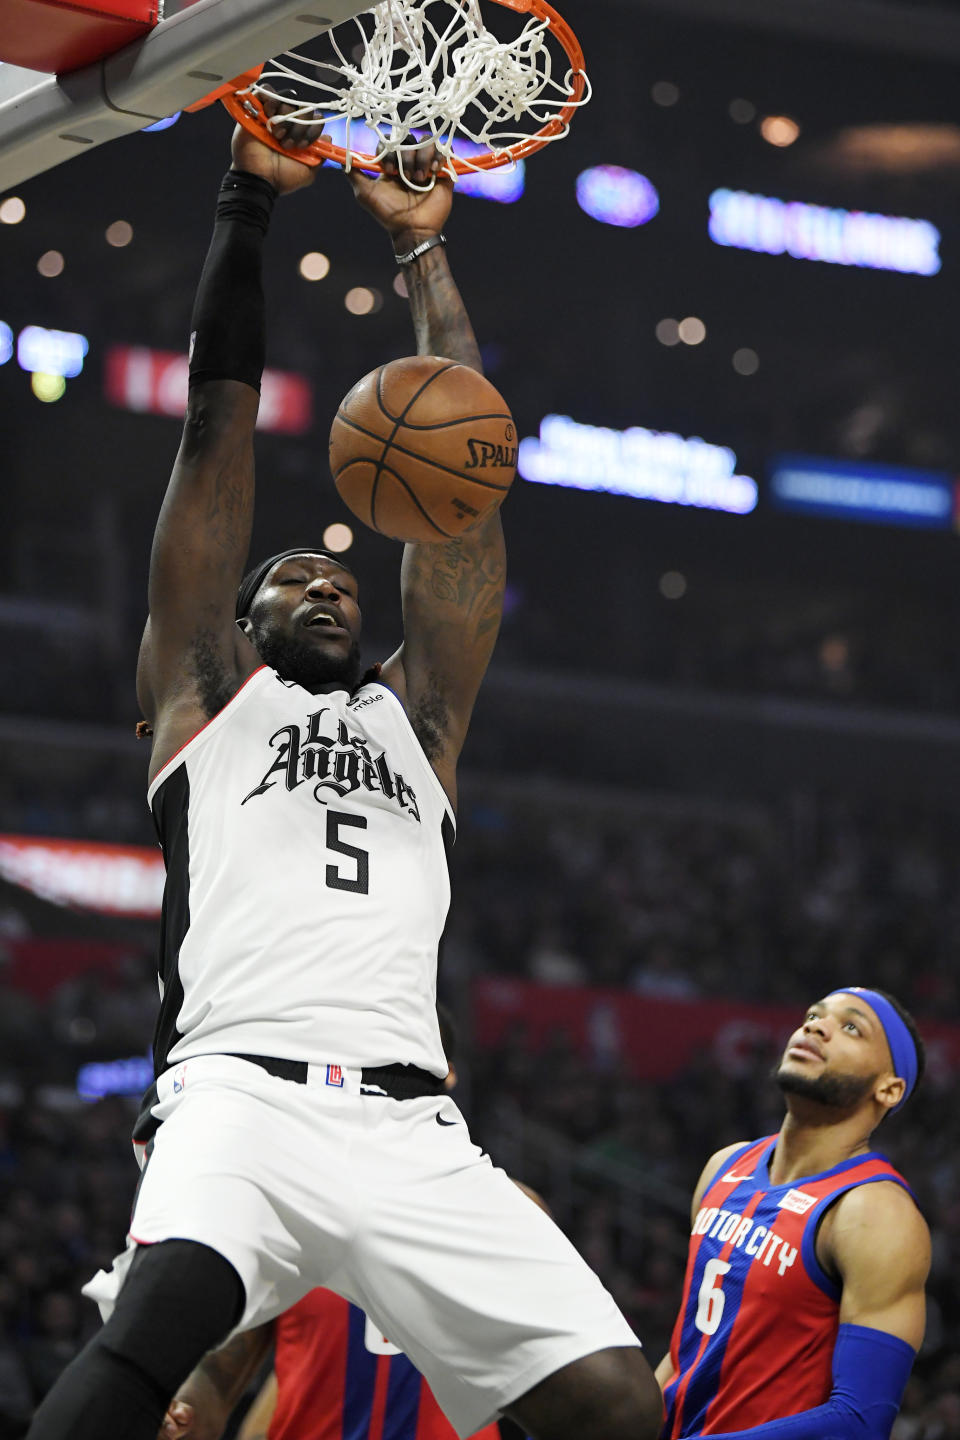 Los Angeles Clippers forward Montrezl Harrell dunks as Detroit Pistons guard Bruce Brown watches during the first half of an NBA basketball game Thursday, Jan. 2, 2020, in Los Angeles. (AP Photo/Mark J. Terrill)